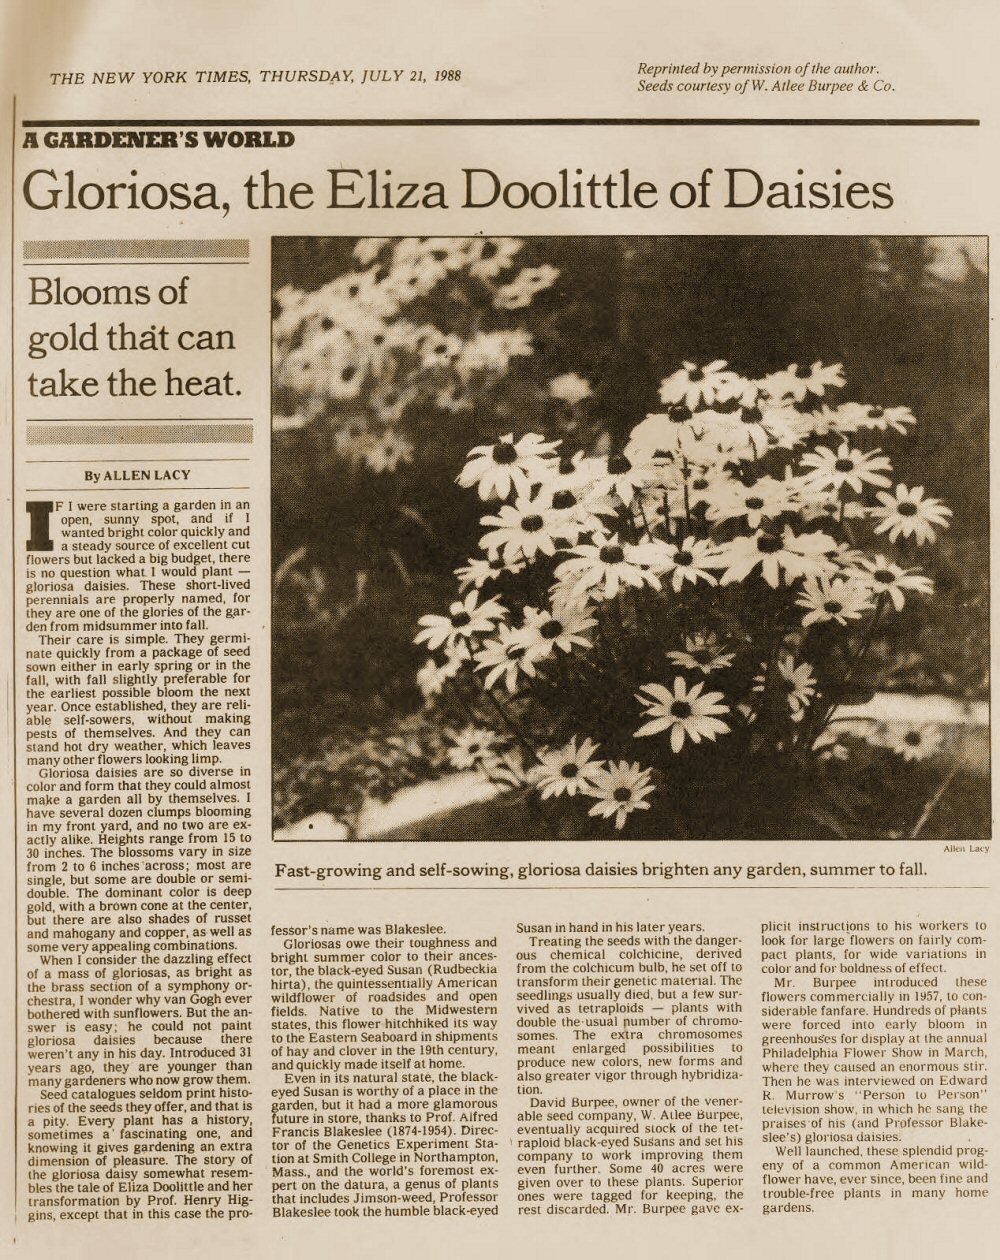 New York Times article about The Gloriosa Daisy, July 21, 1988  